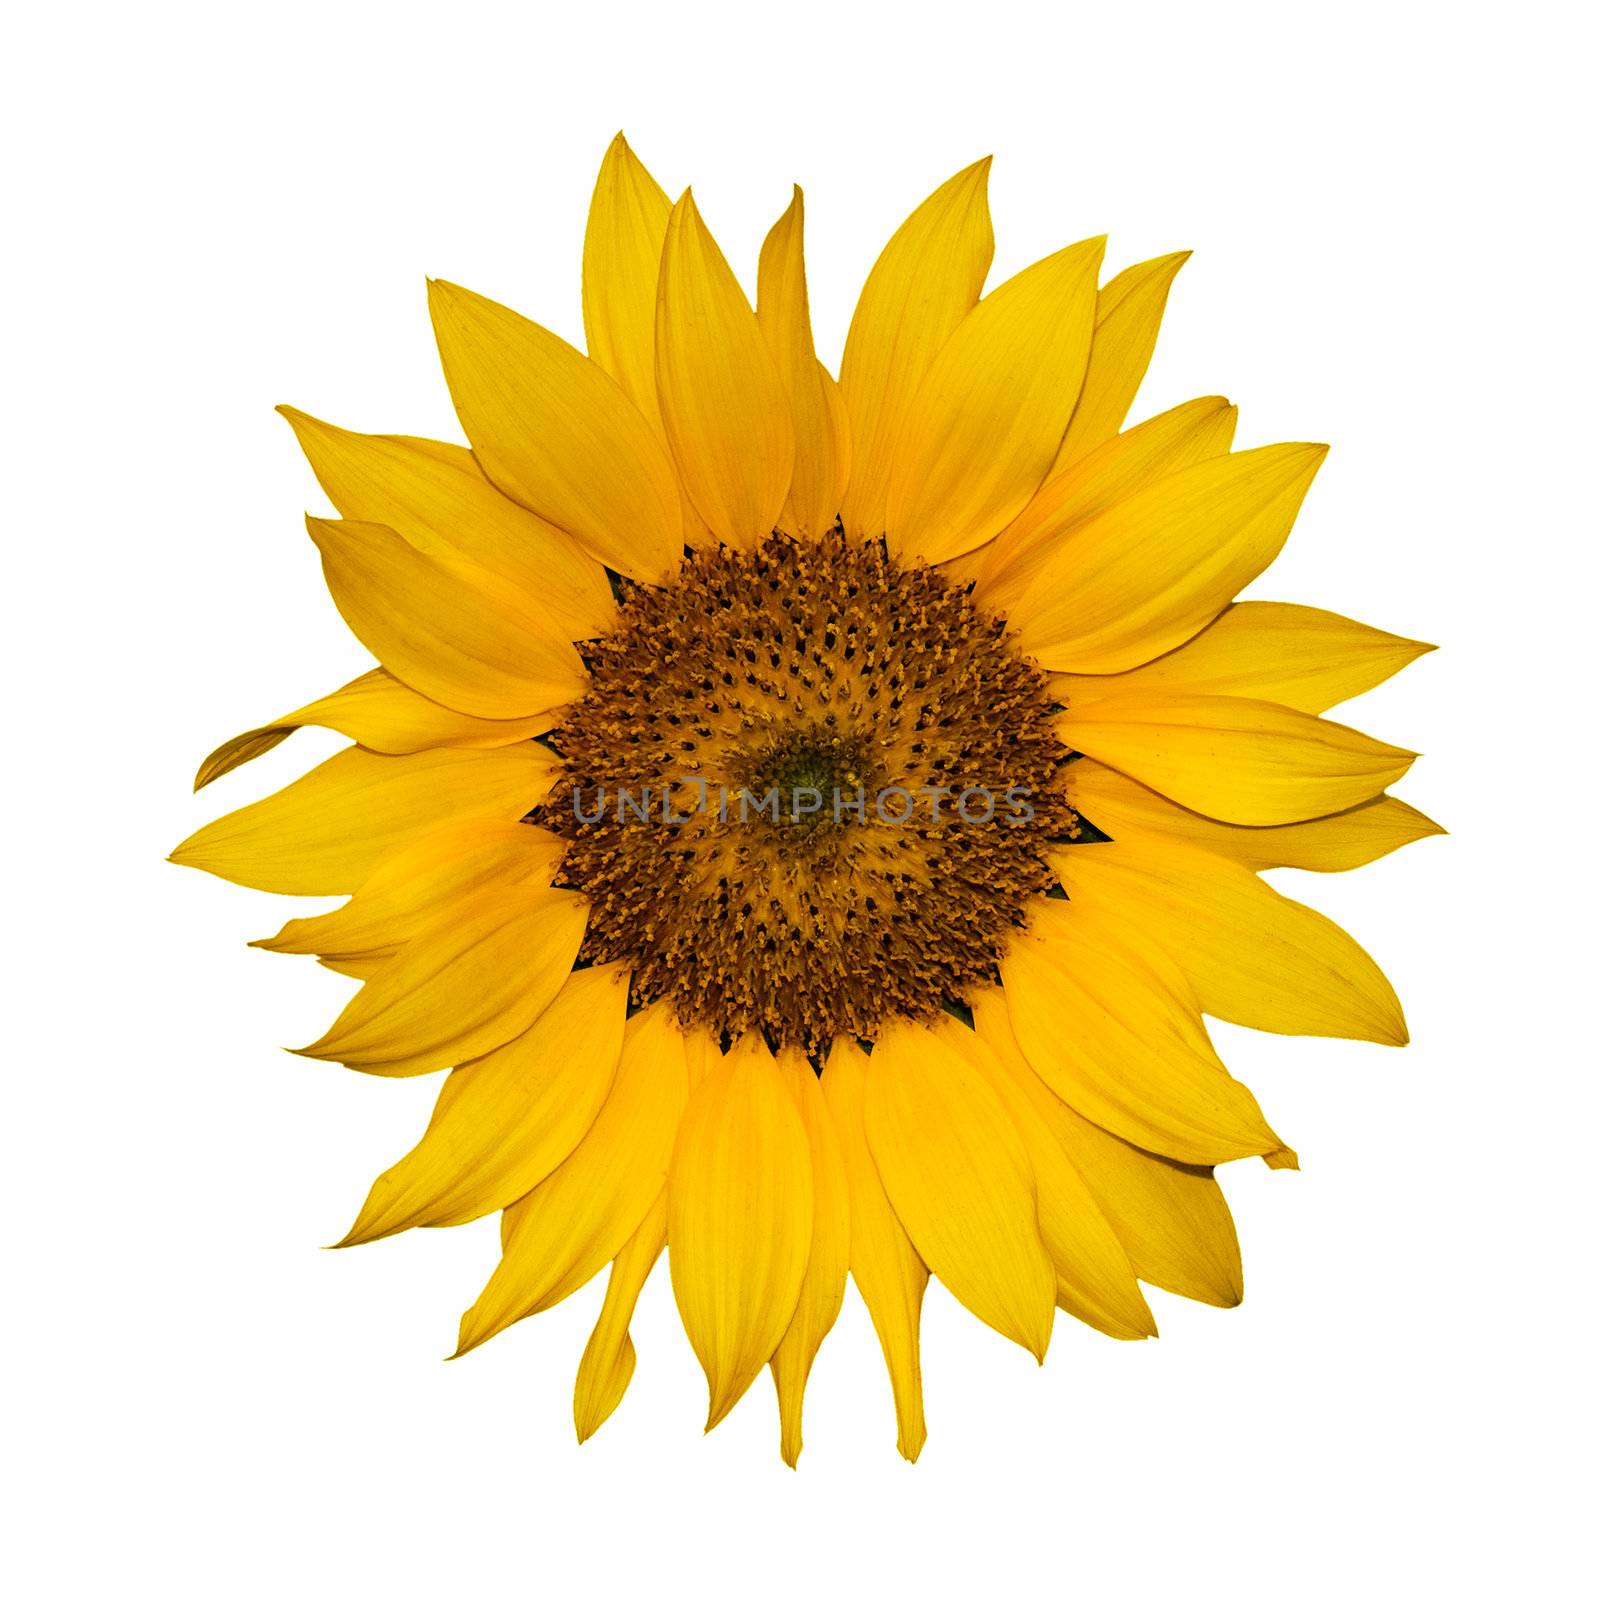 Single yellow color sunflower on white background.